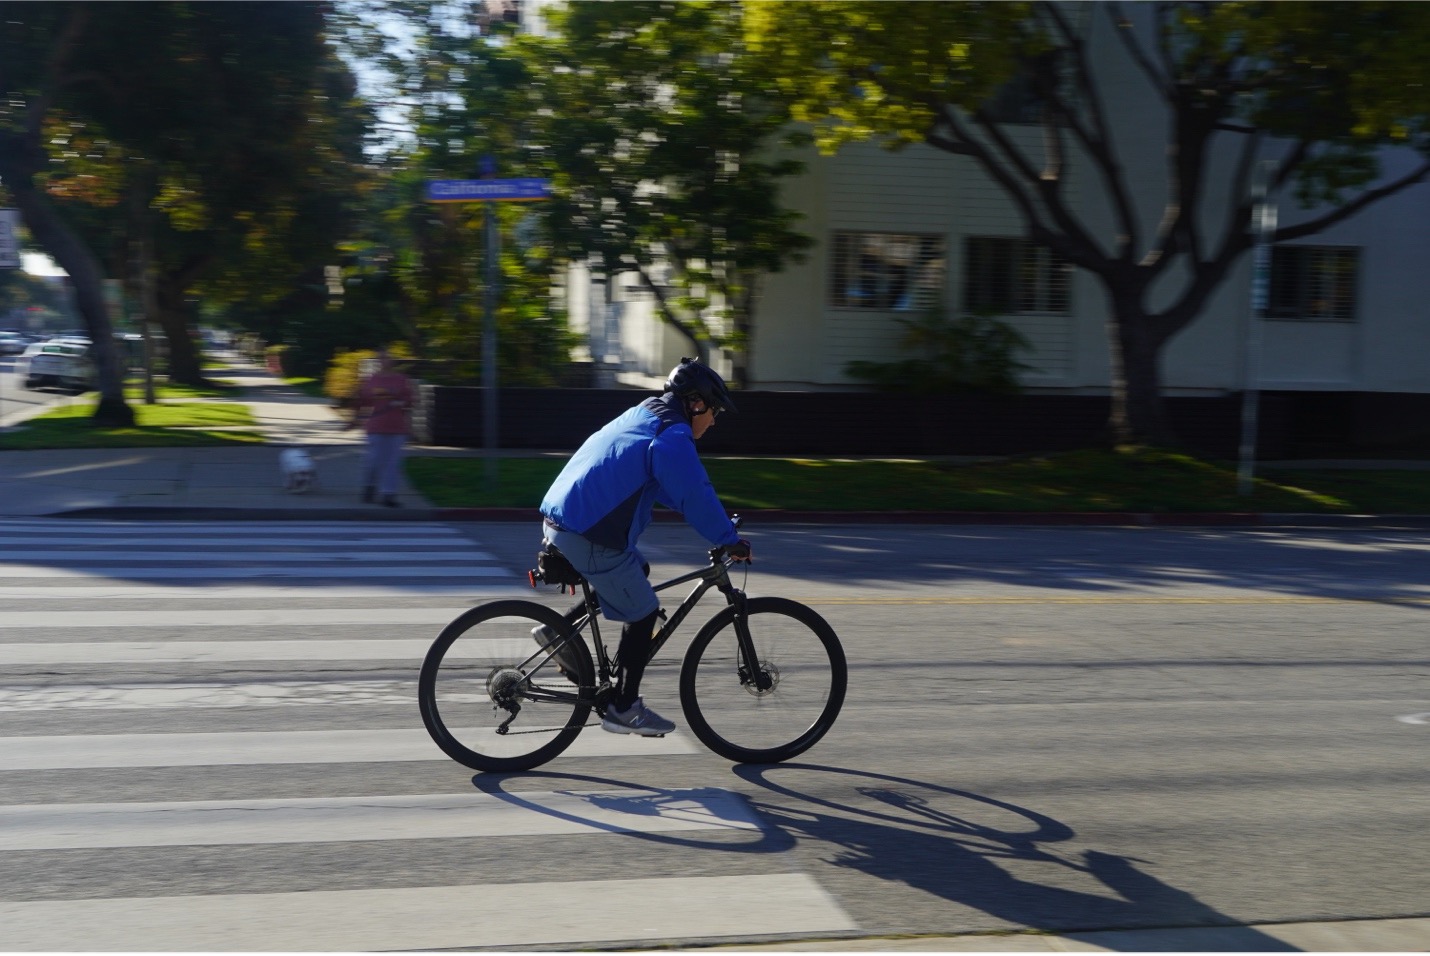 bike rider with blue jacket riding on the street